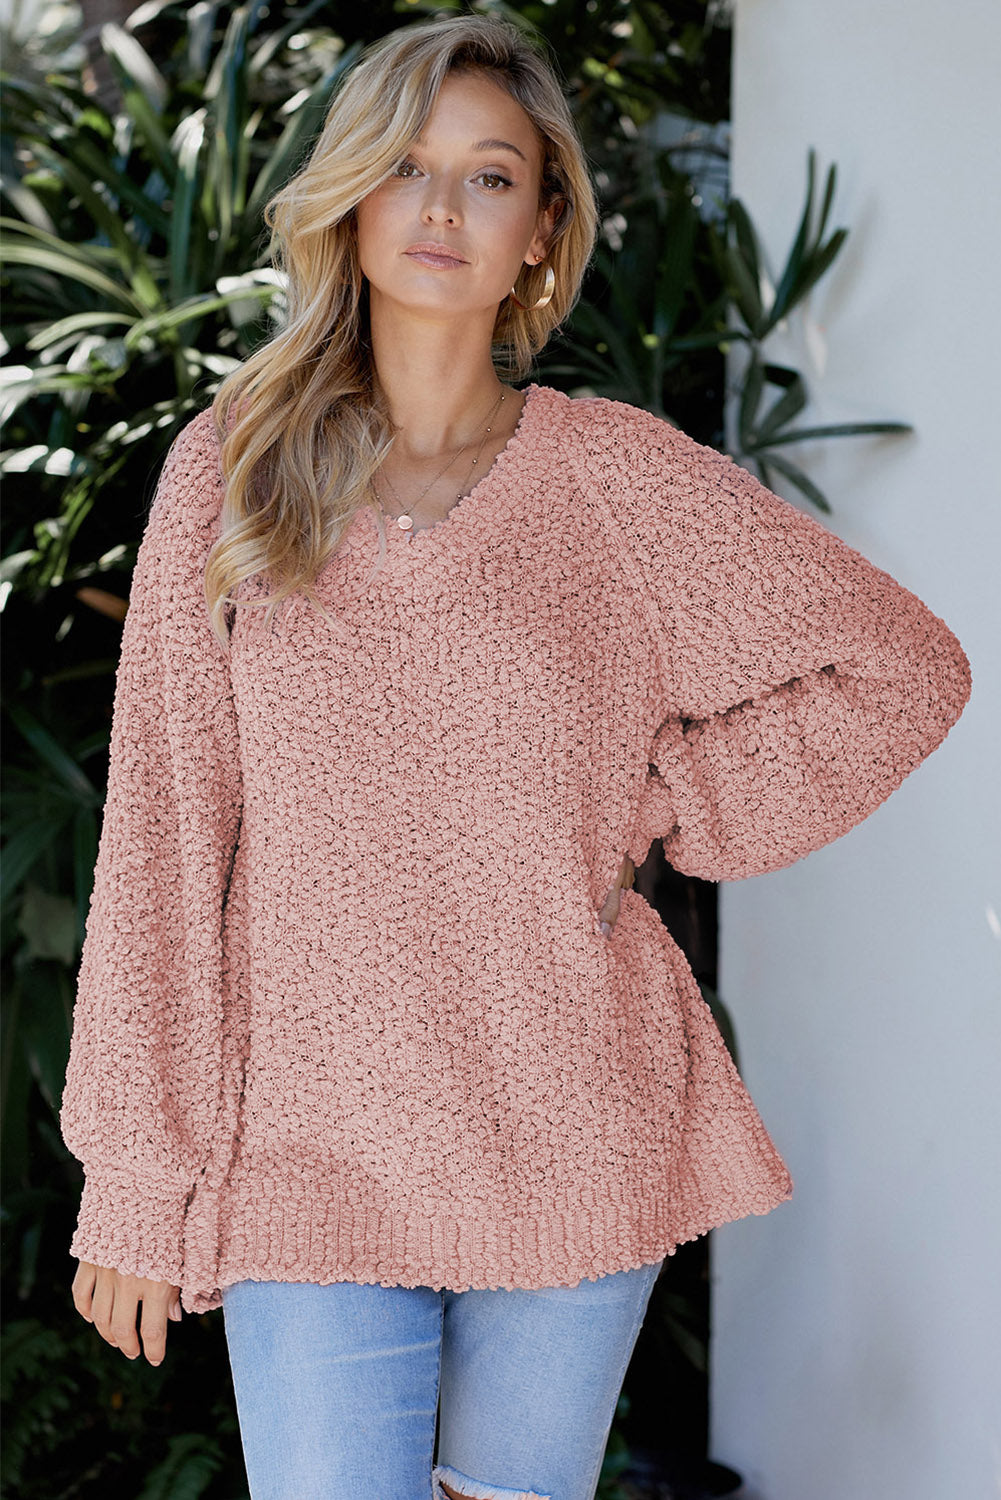 Chill in The Air Sweater